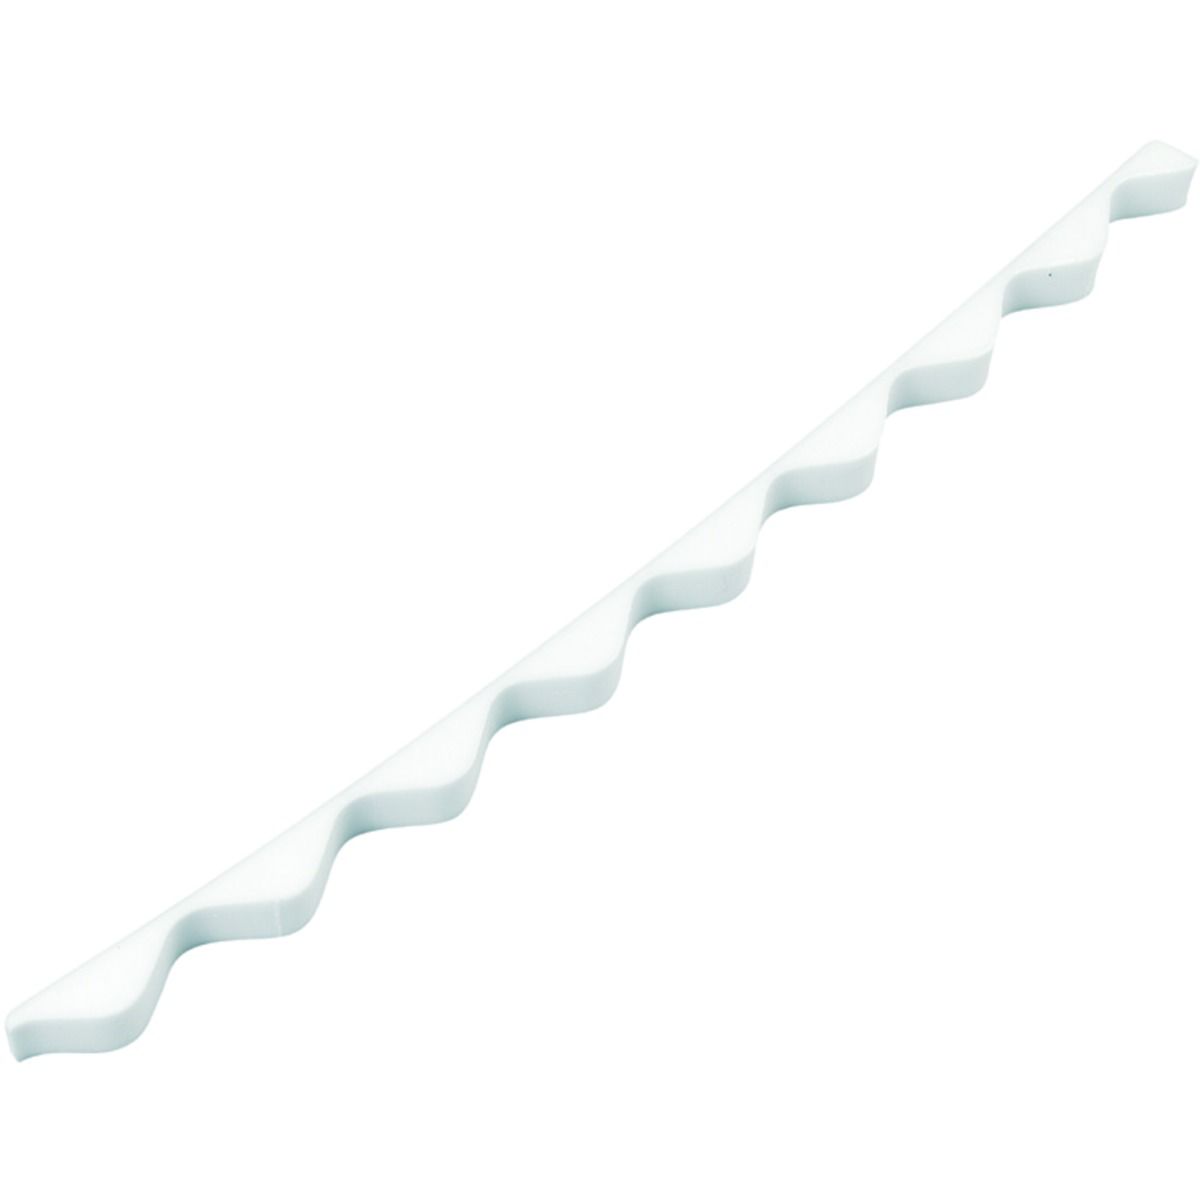 Wickes Eaves Fillers for Corrugated Sheets Pack 6